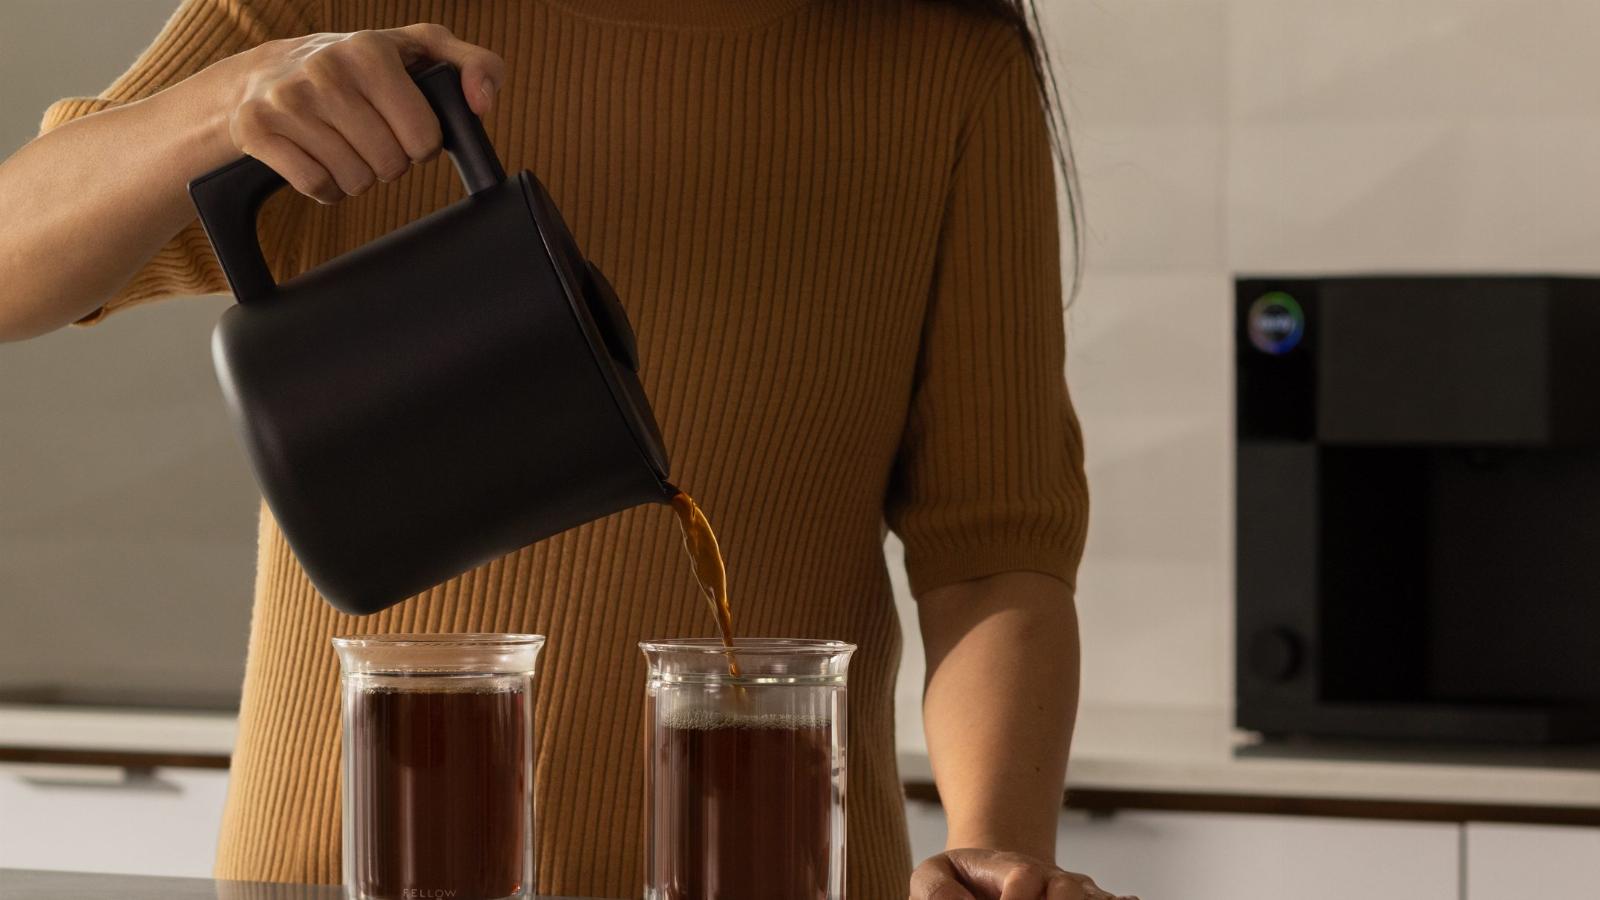 Fellow steps away from its usual grind with $365 Aiden coffee machine